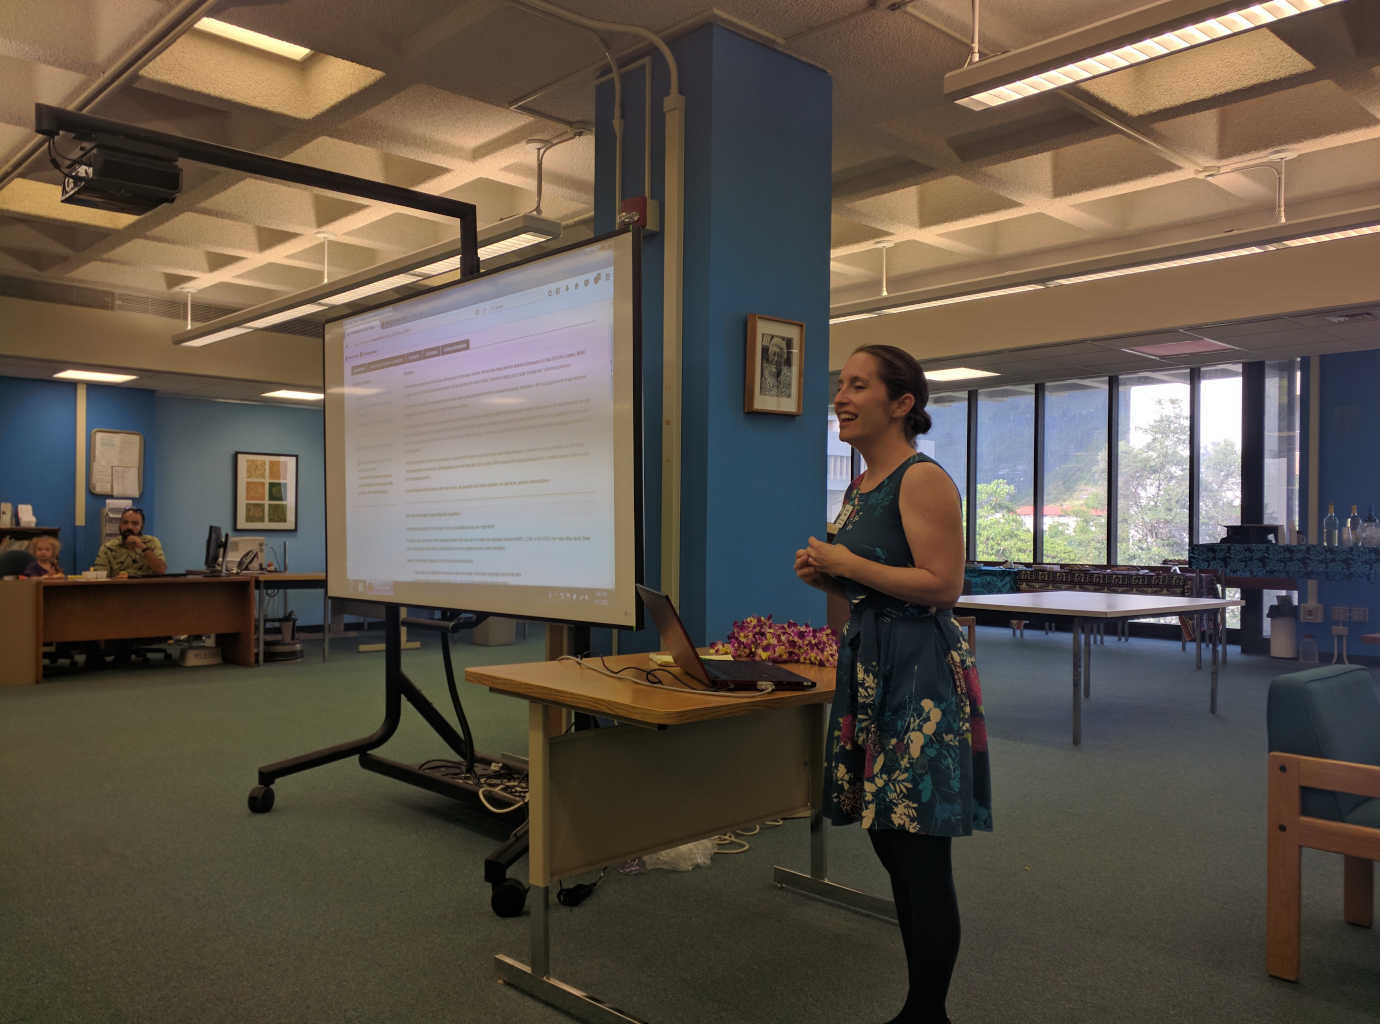 A public outreach event in April of 2017 invited local stakeholders to the Hamilton Library Pacific Collection to introduce them to the updated catalog. Image courtesy of University of Hawaiʻi Mānoa.